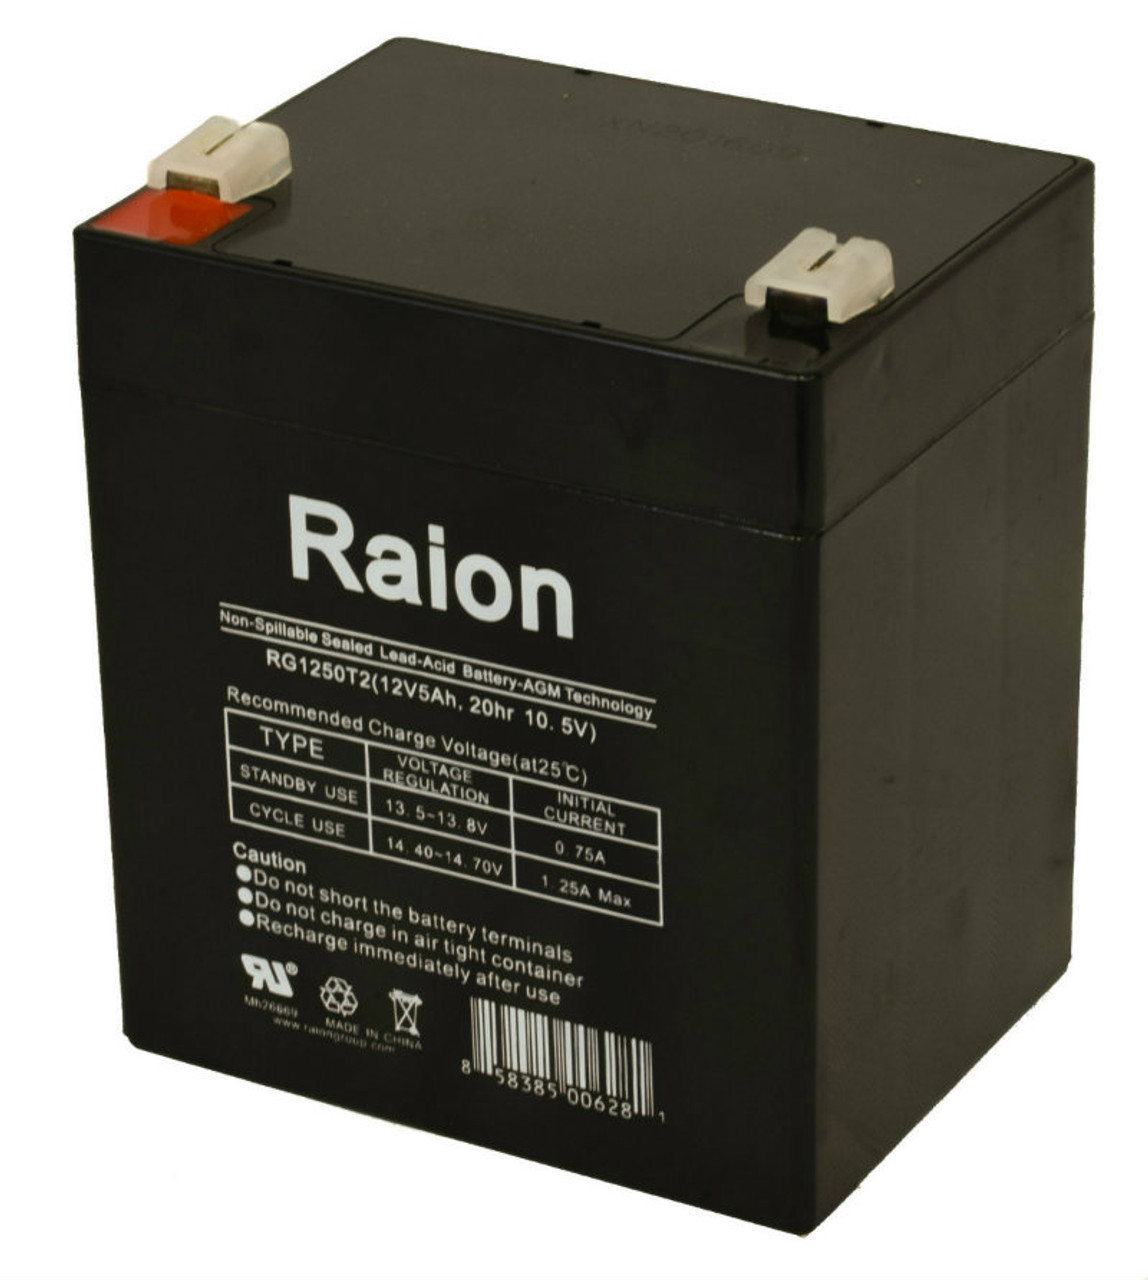 Raion Power RG1250T2 Replacement Battery for Raion Power RG1250T2